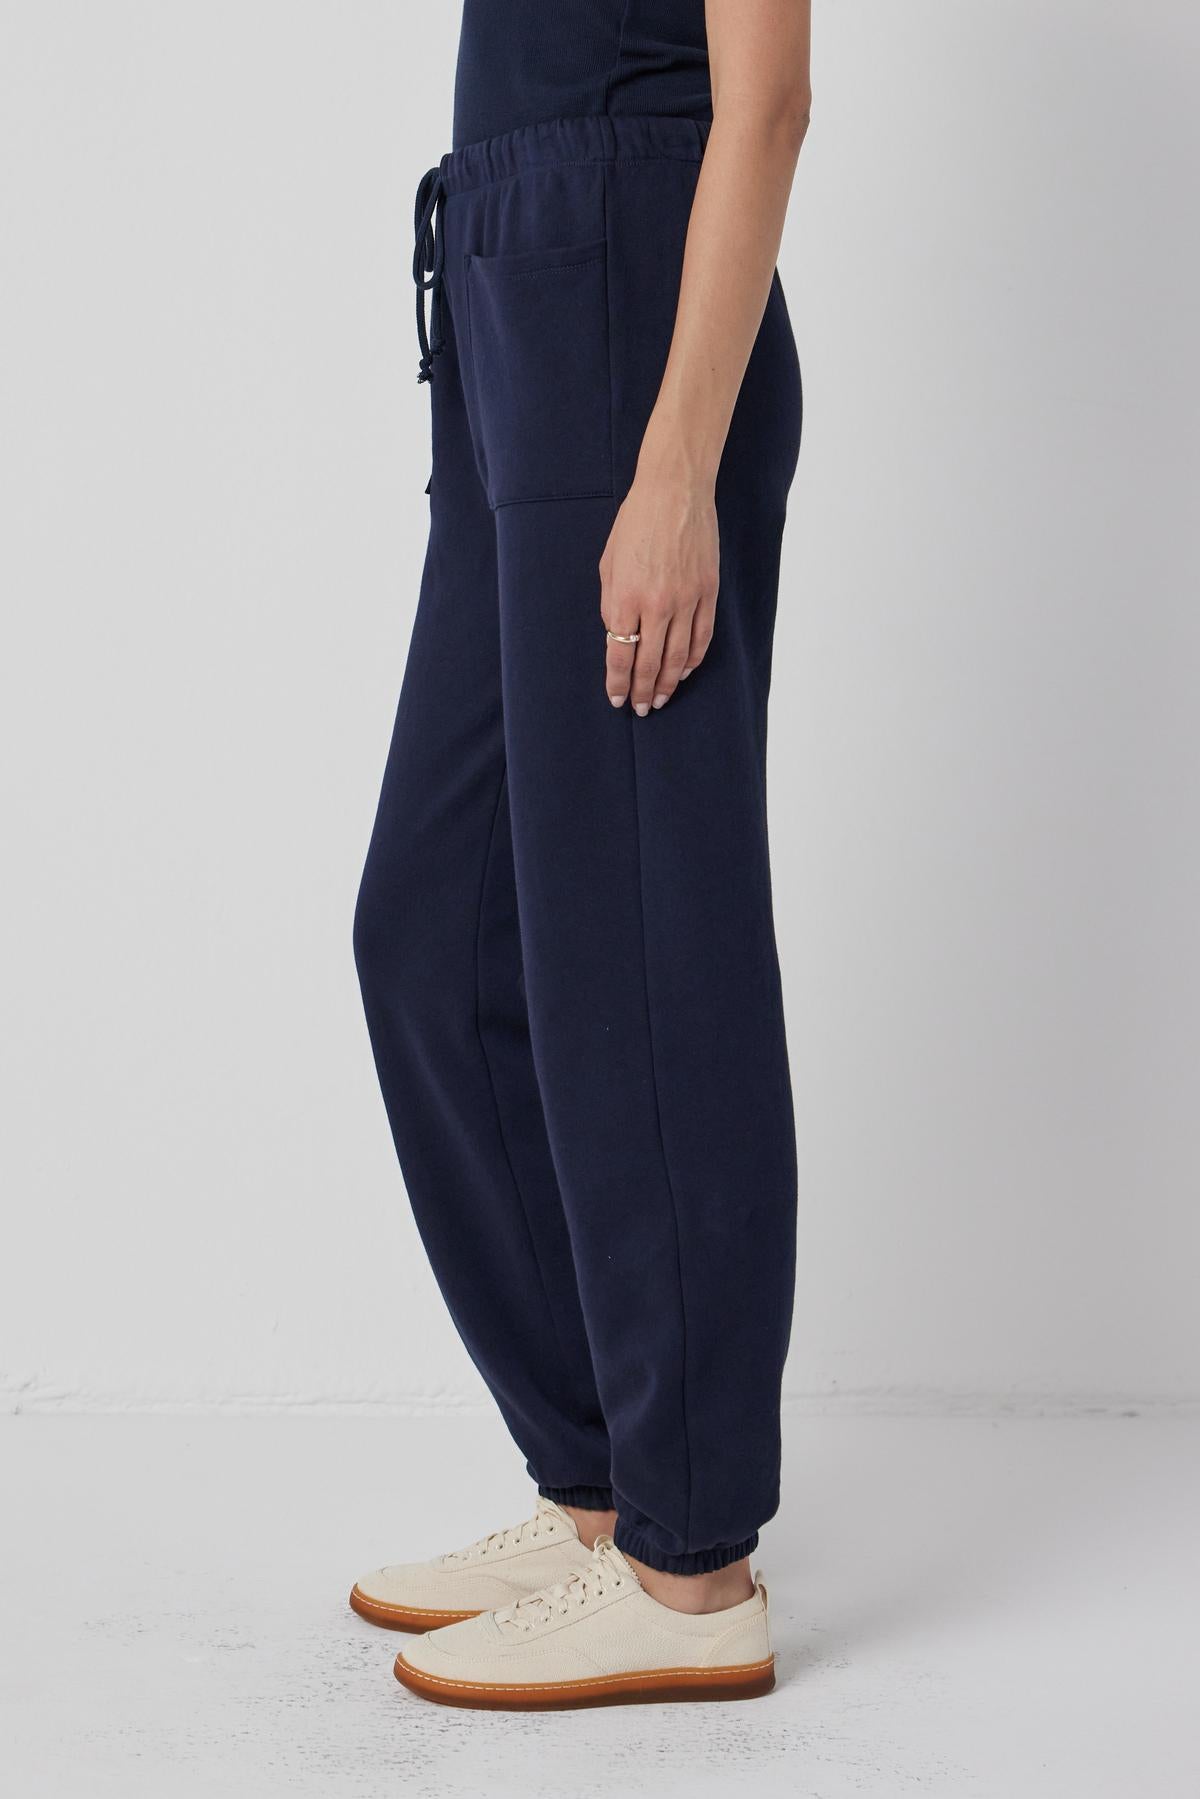 A woman wearing Velvet by Jenny Graham WESTLAKE SWEATPANT and a white t - shirt.-36168729755841